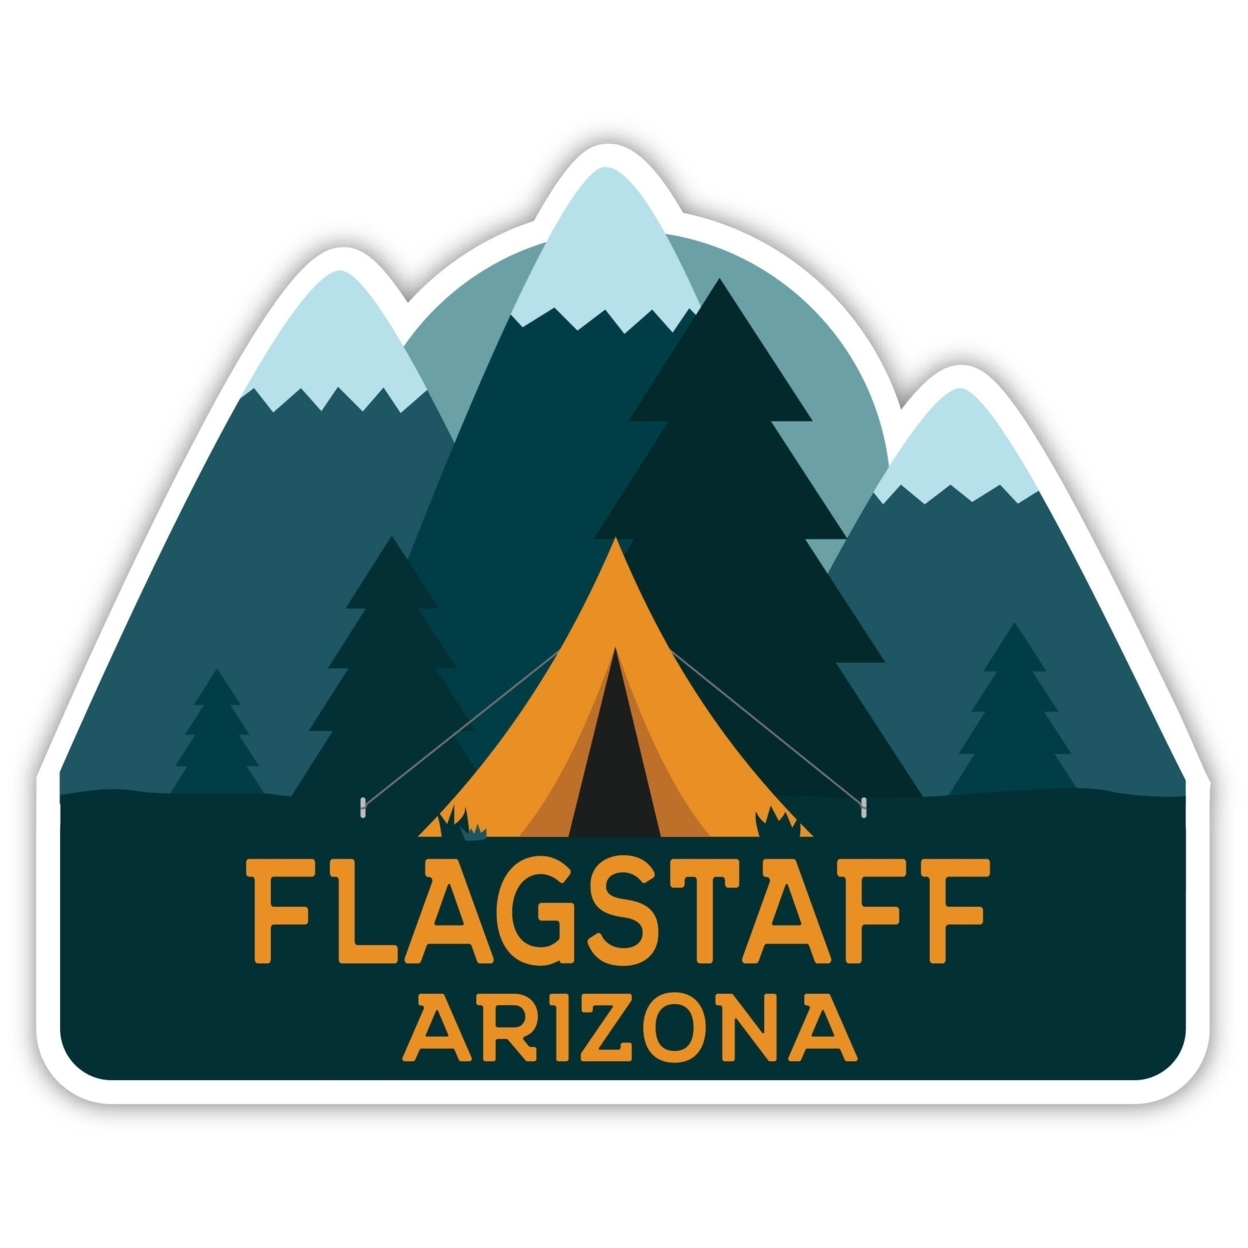 Flagstaff Arizona Souvenir Decorative Stickers (Choose Theme And Size) - 4-Pack, 10-Inch, Great Outdoors